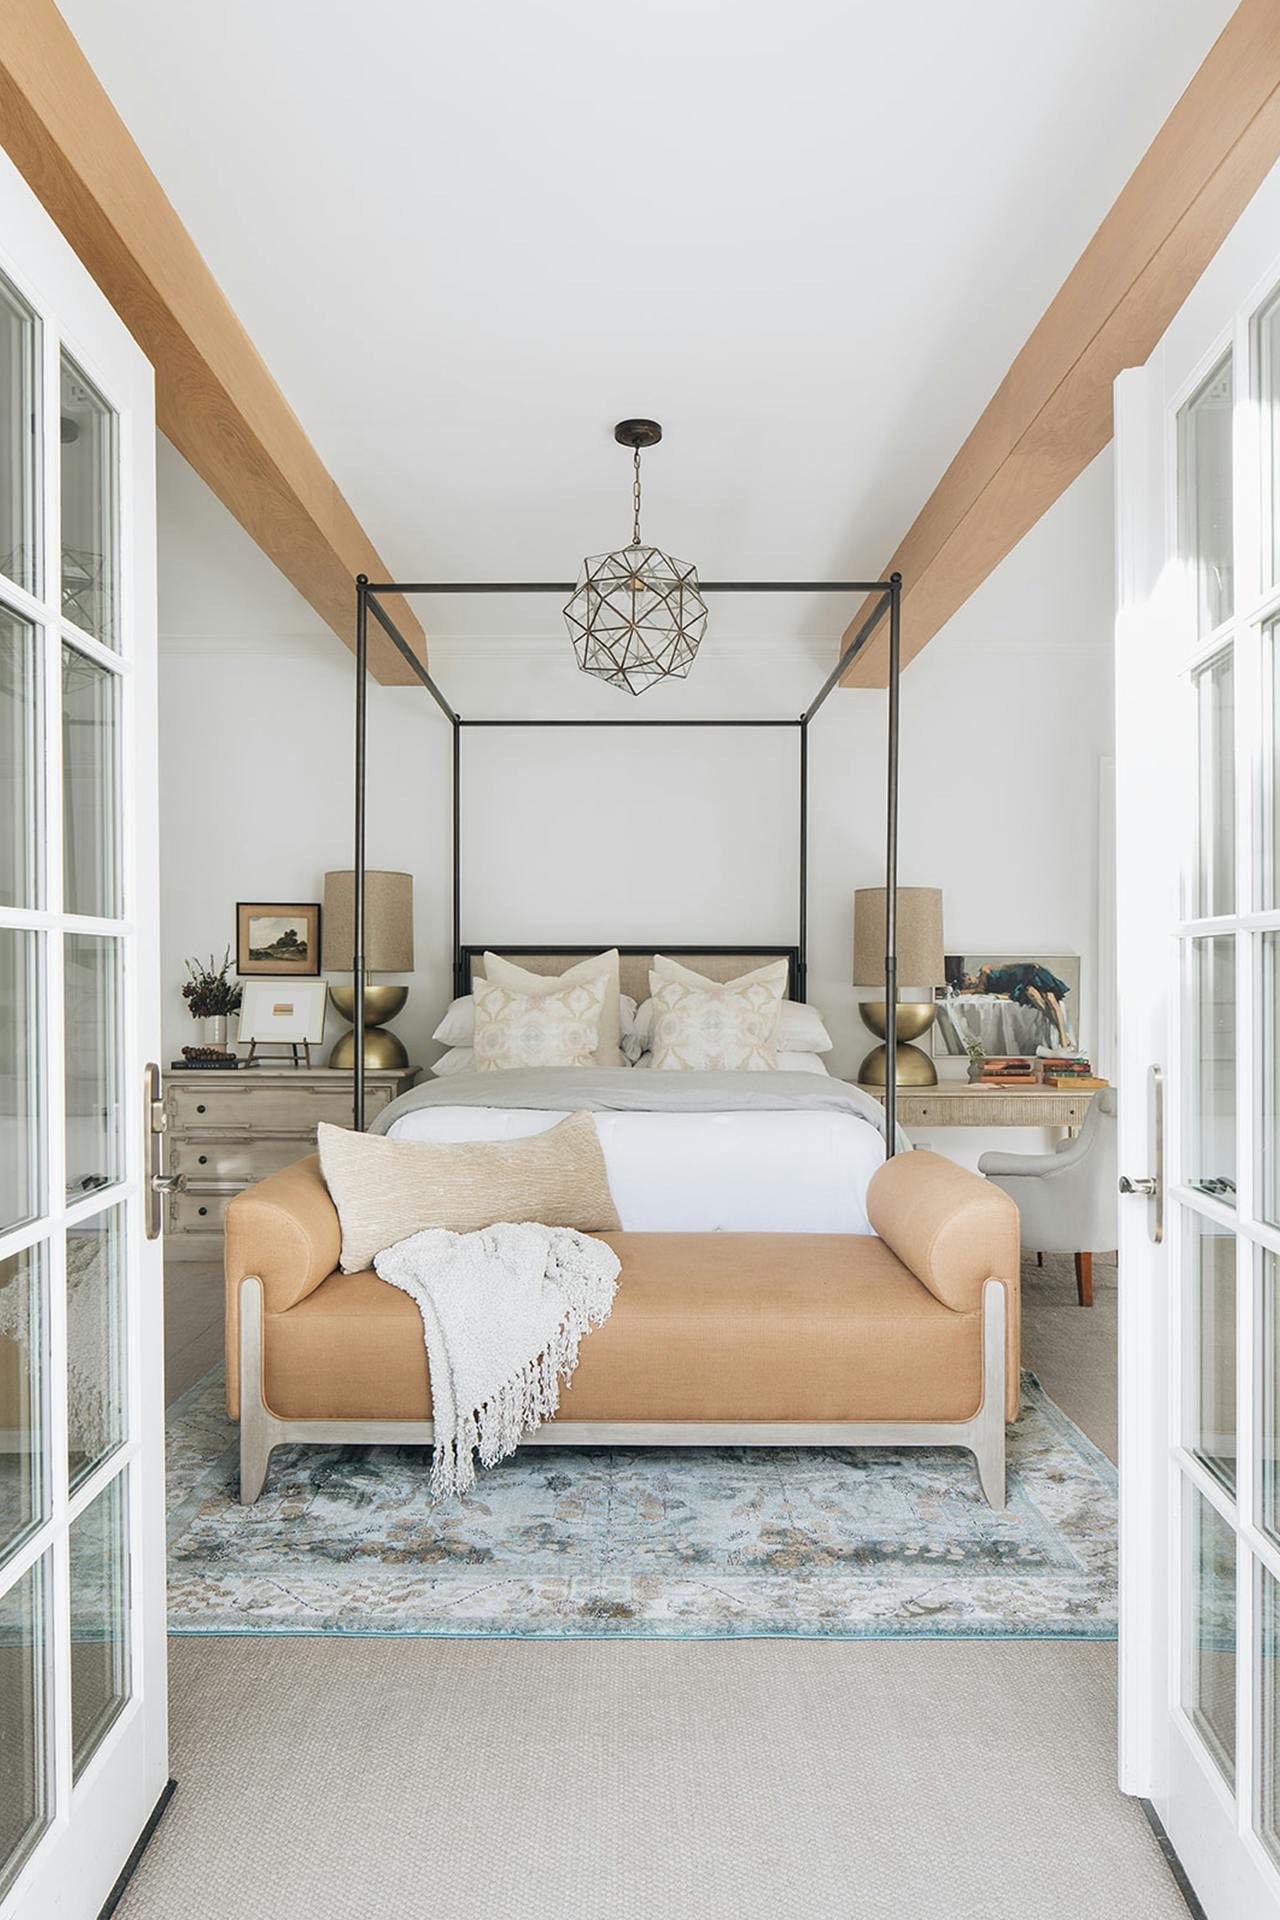 Nicole-Green-Design-Project-Chevy-Chase-Historic-East-Coast-Home-Bedroom-2